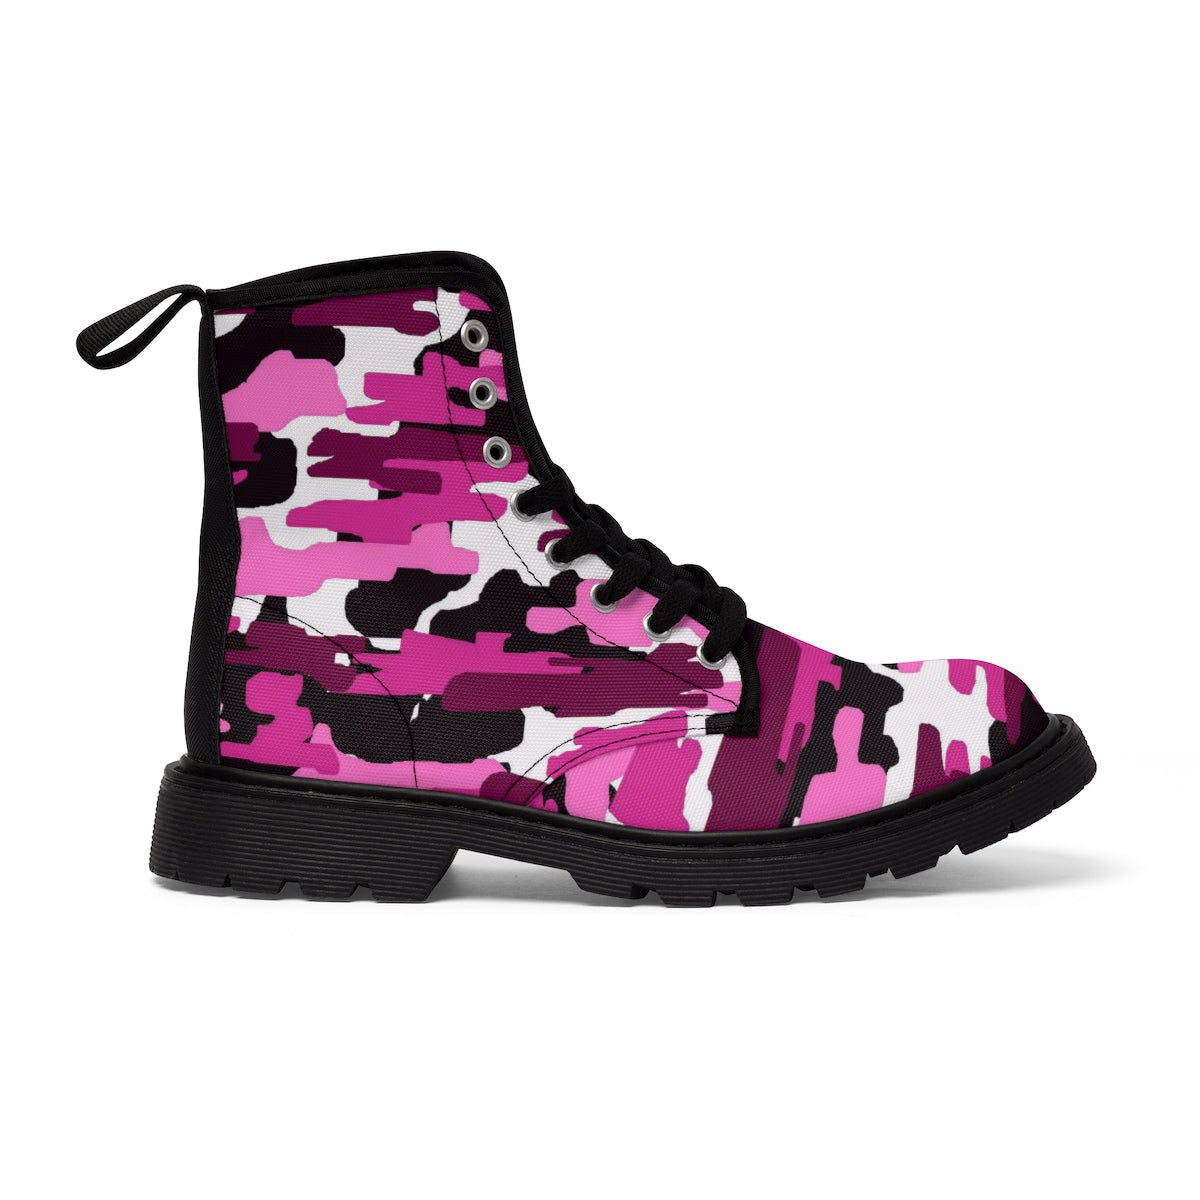 Purple Pink Camo Men's Boots, Camouflage Military Army Canvas Winter ...